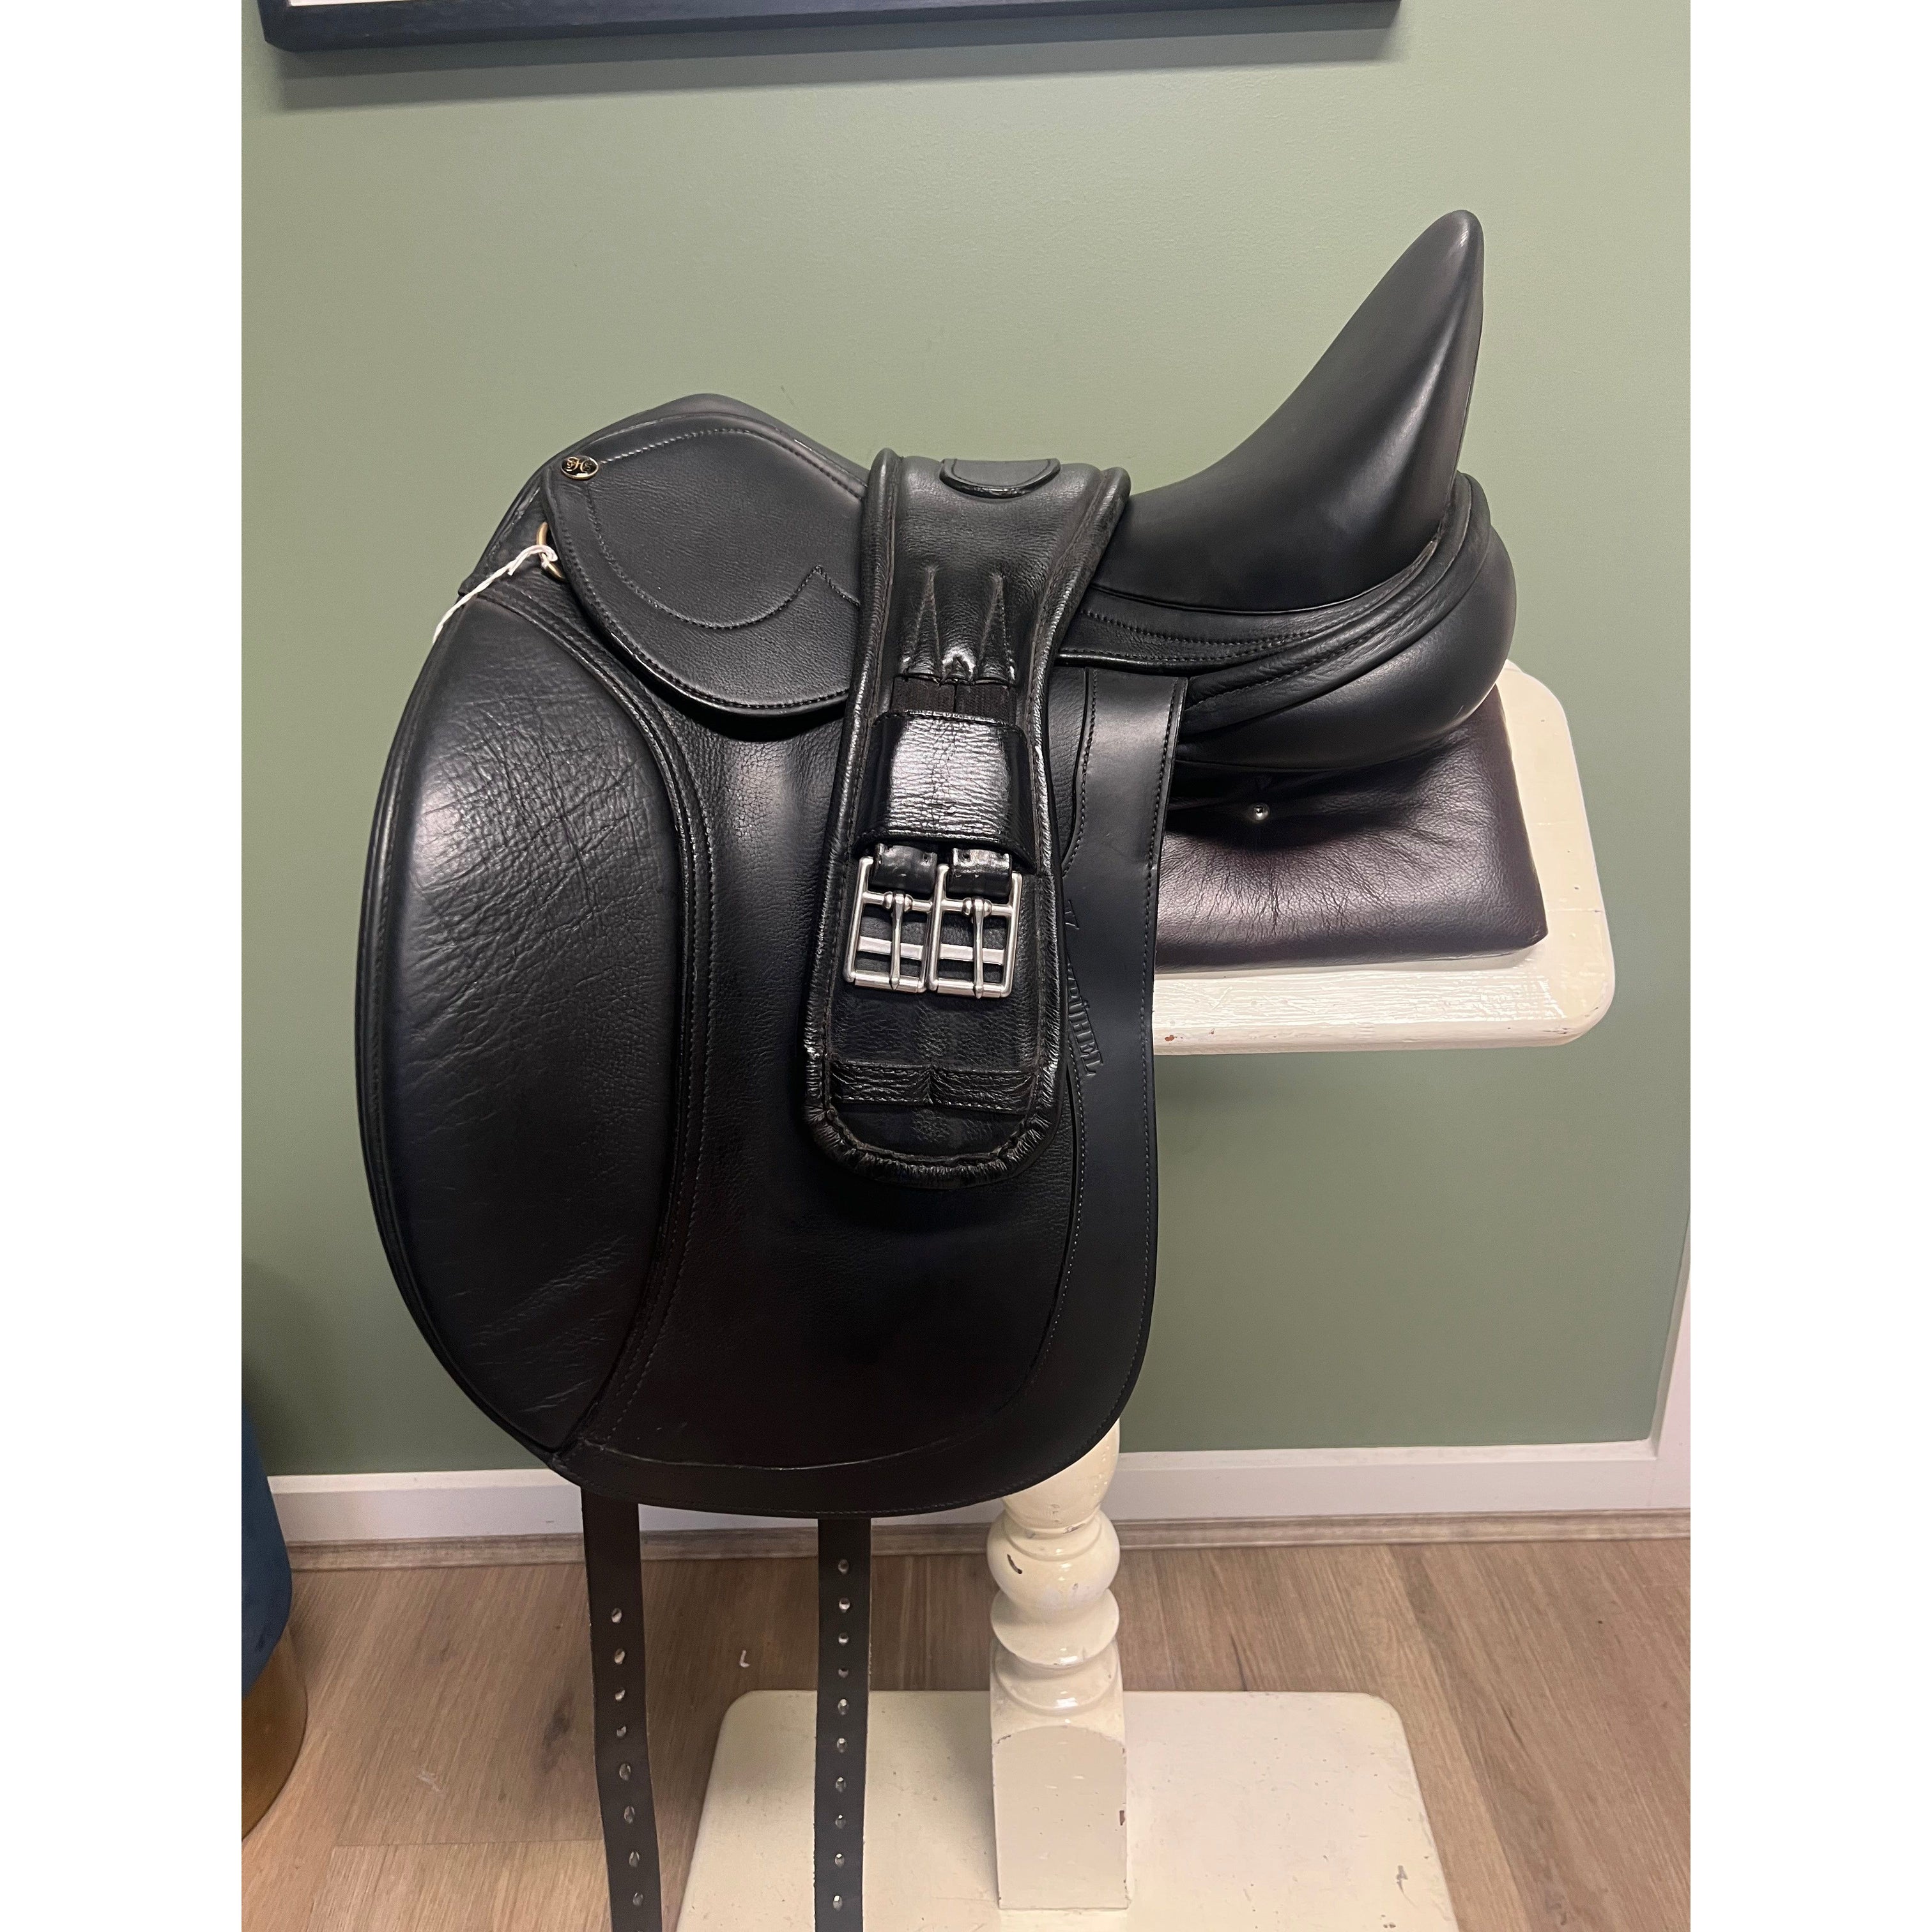 Pre Loved Kitzbuhel Saddle 17" Black with 24" second hand girth to match